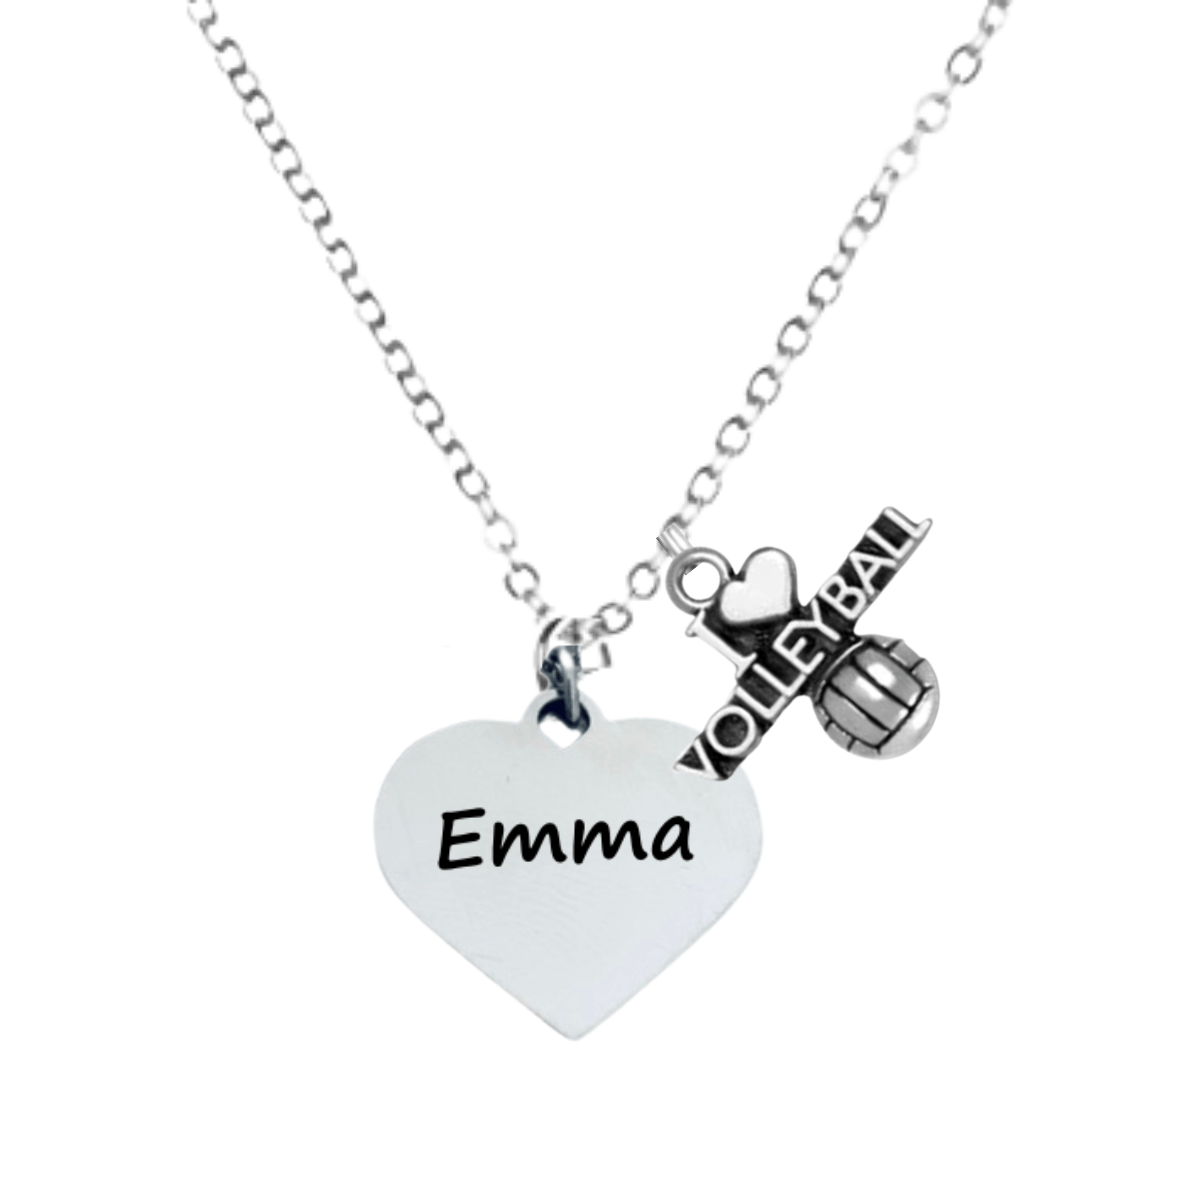 Personalized Engraved Volleyball Necklace